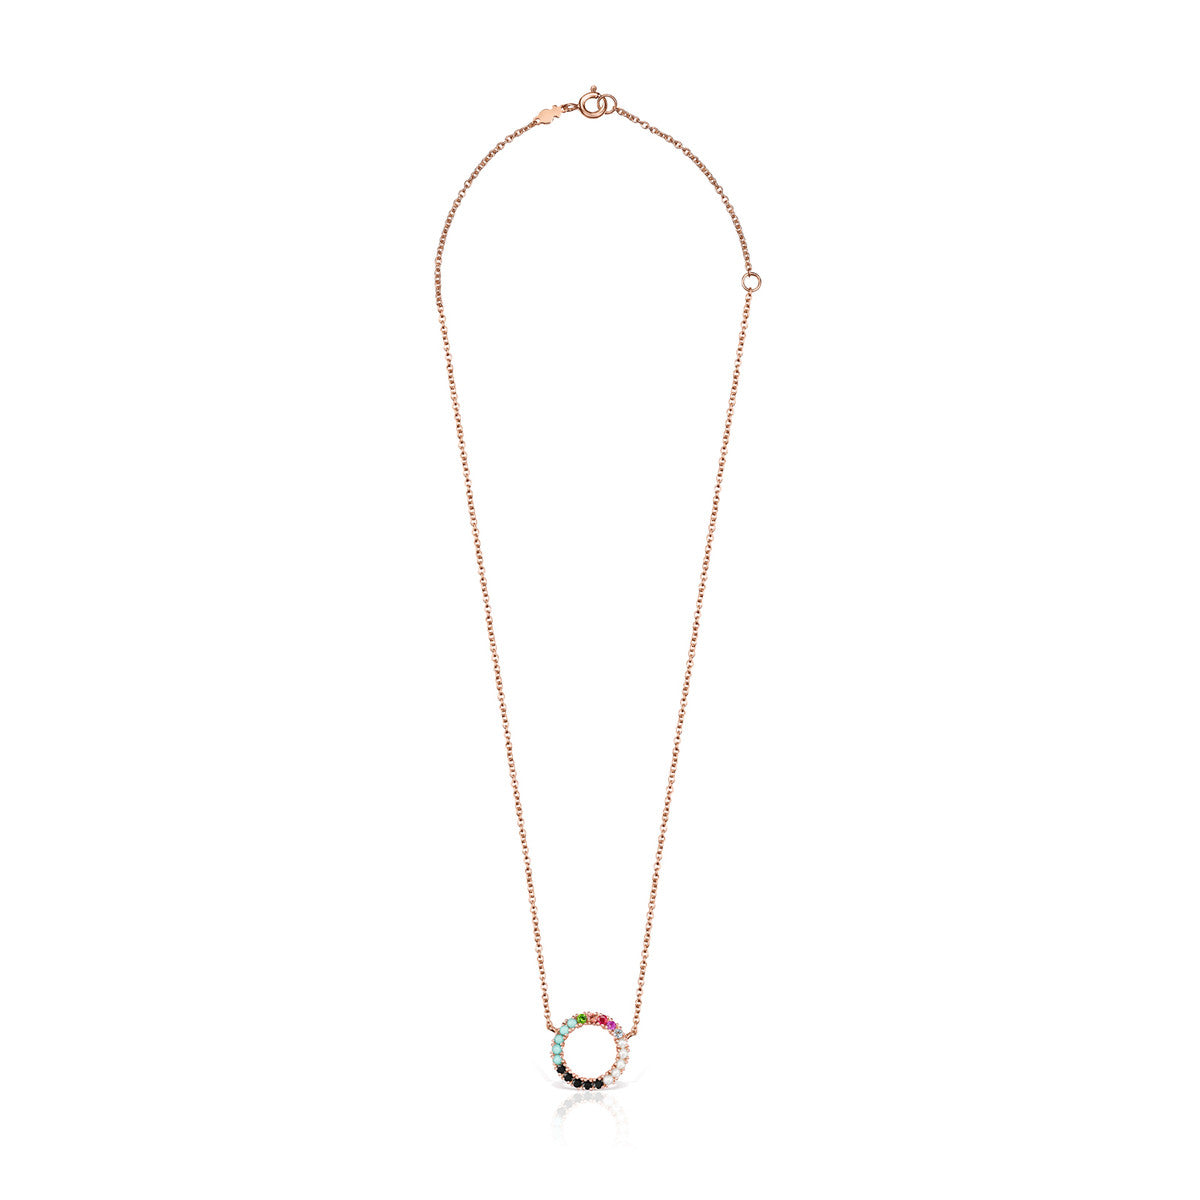 Tous Straight disc Necklace in Rose Gold Vermeil with Gemstones 912722510